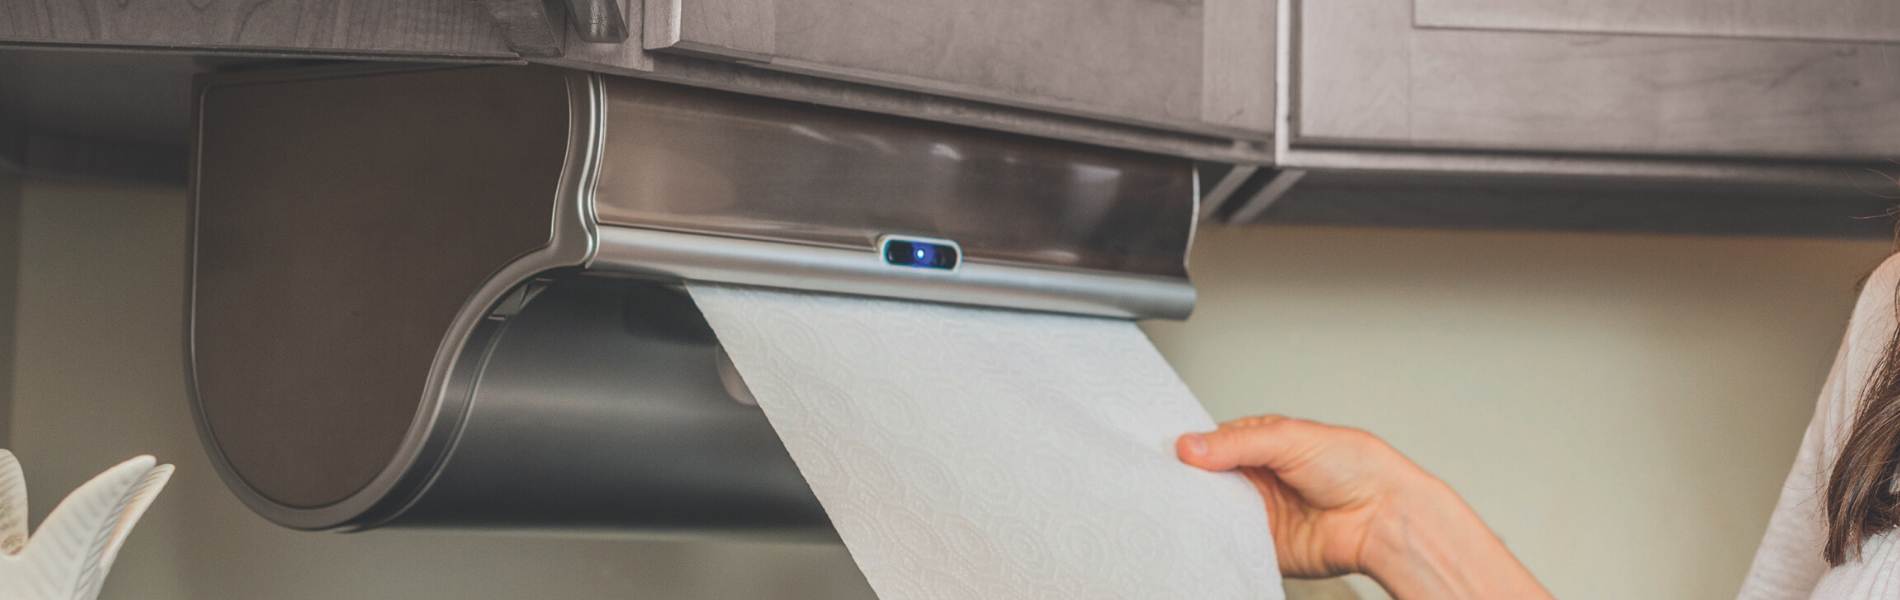 Innovia Automatic Paper Towel Dispenser. Touchless Technology. Works with  Most Paper Towel Brands and Sizes. Dispenses The Number of Sheets You Need.